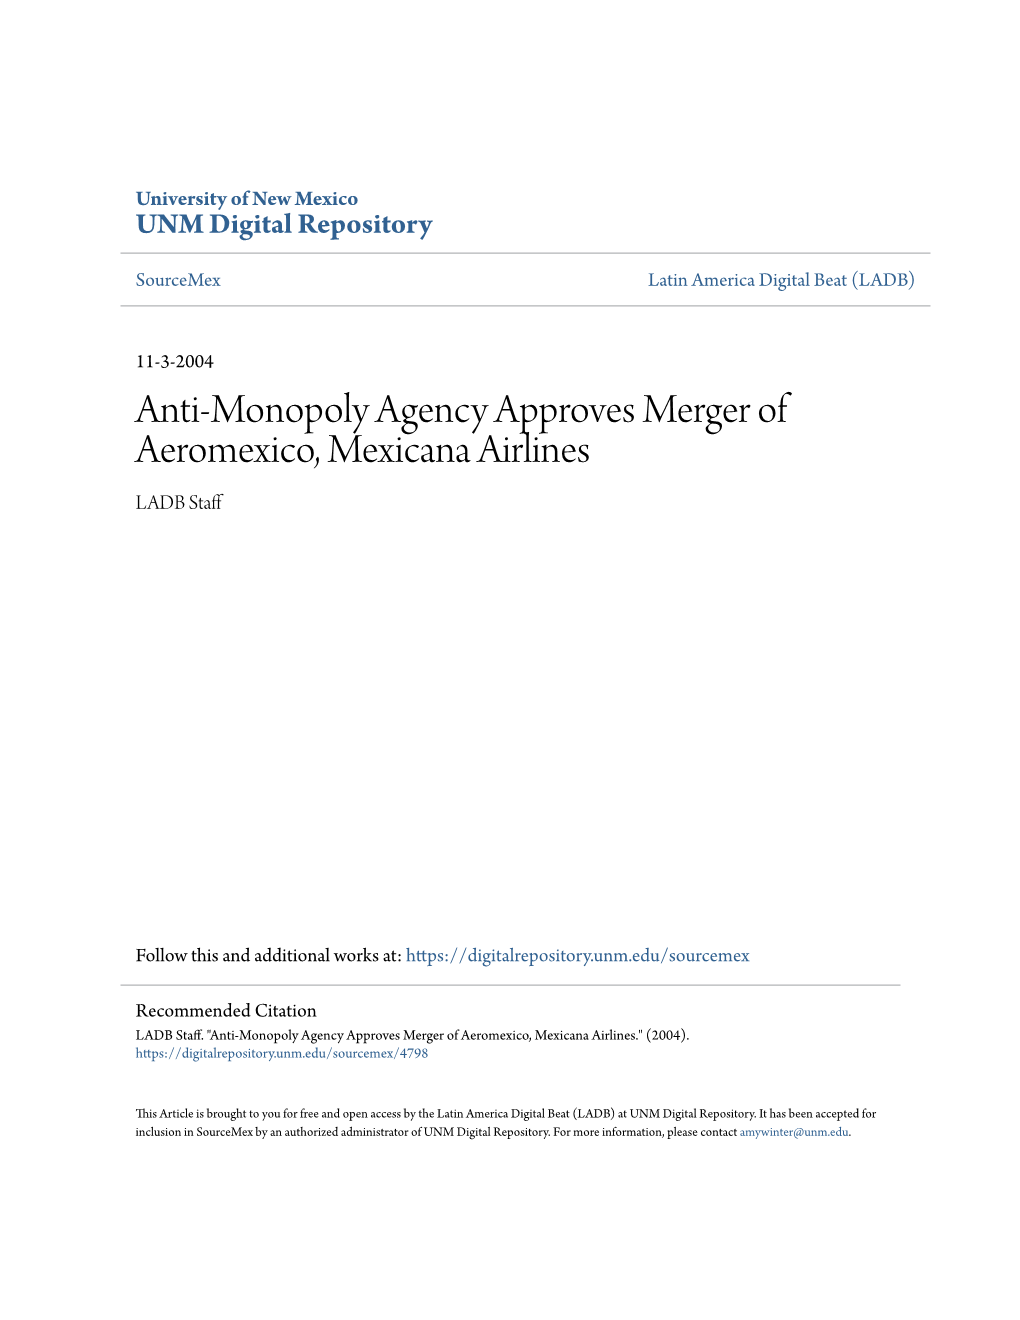 Anti-Monopoly Agency Approves Merger of Aeromexico, Mexicana Airlines LADB Staff